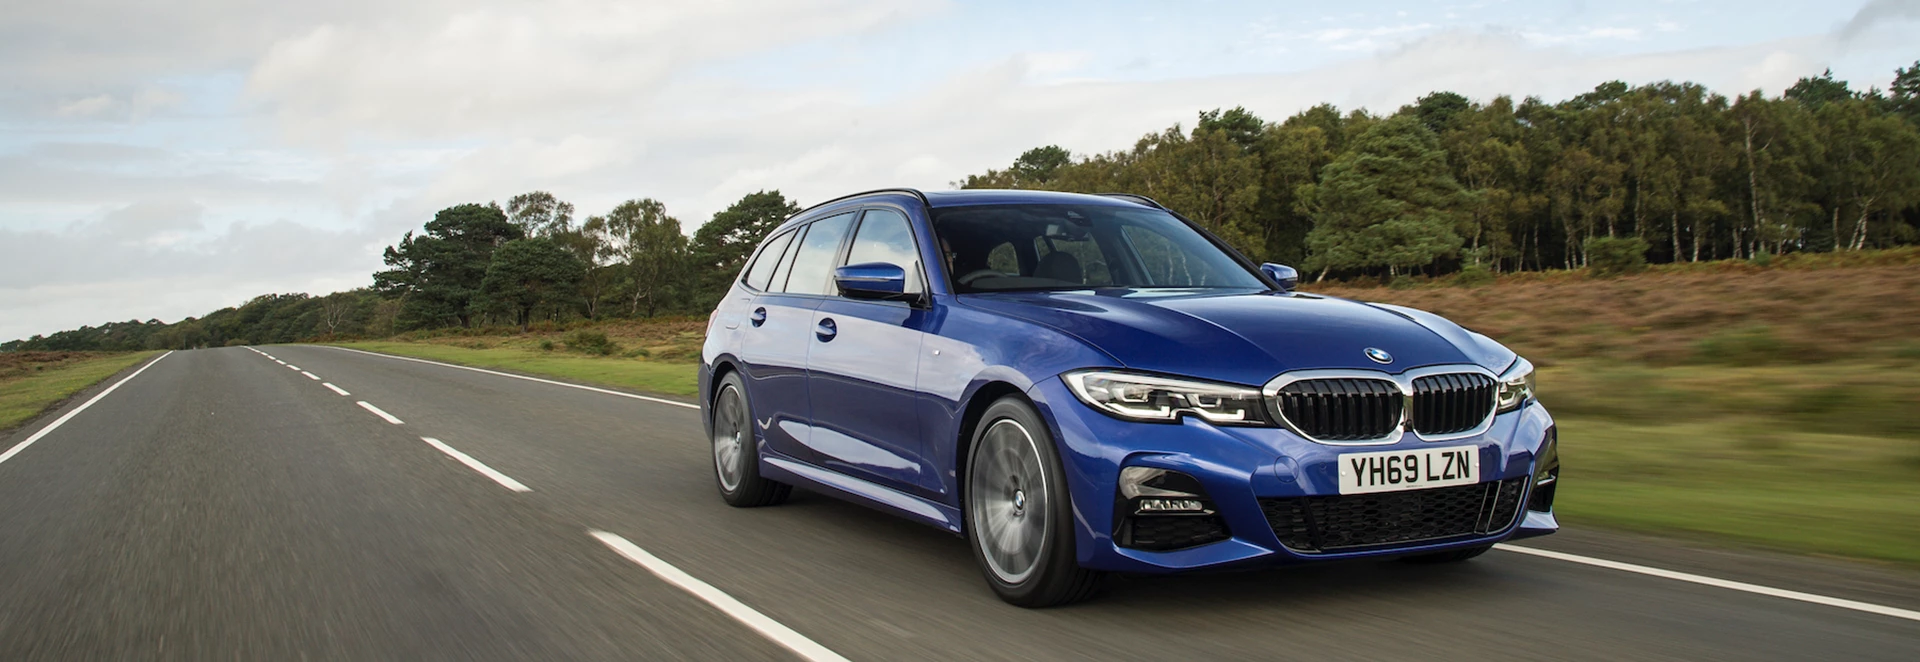 BMW 3 Series, X3 and X4 all set to get efficient new mild-hybrid powertrain 